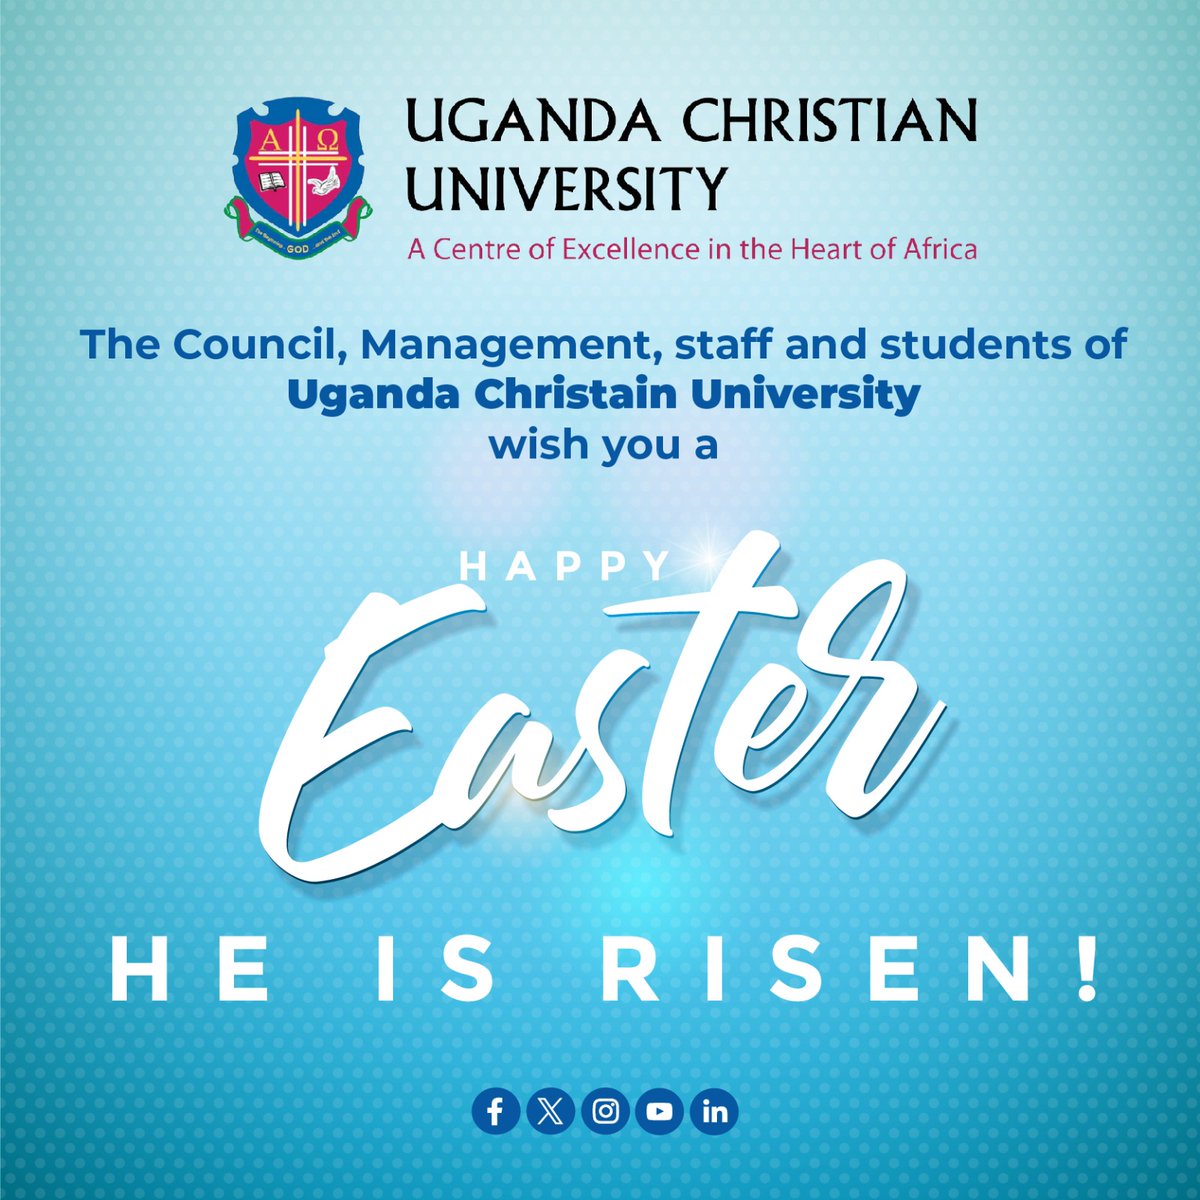 He is Risen! Happy Easter from us.